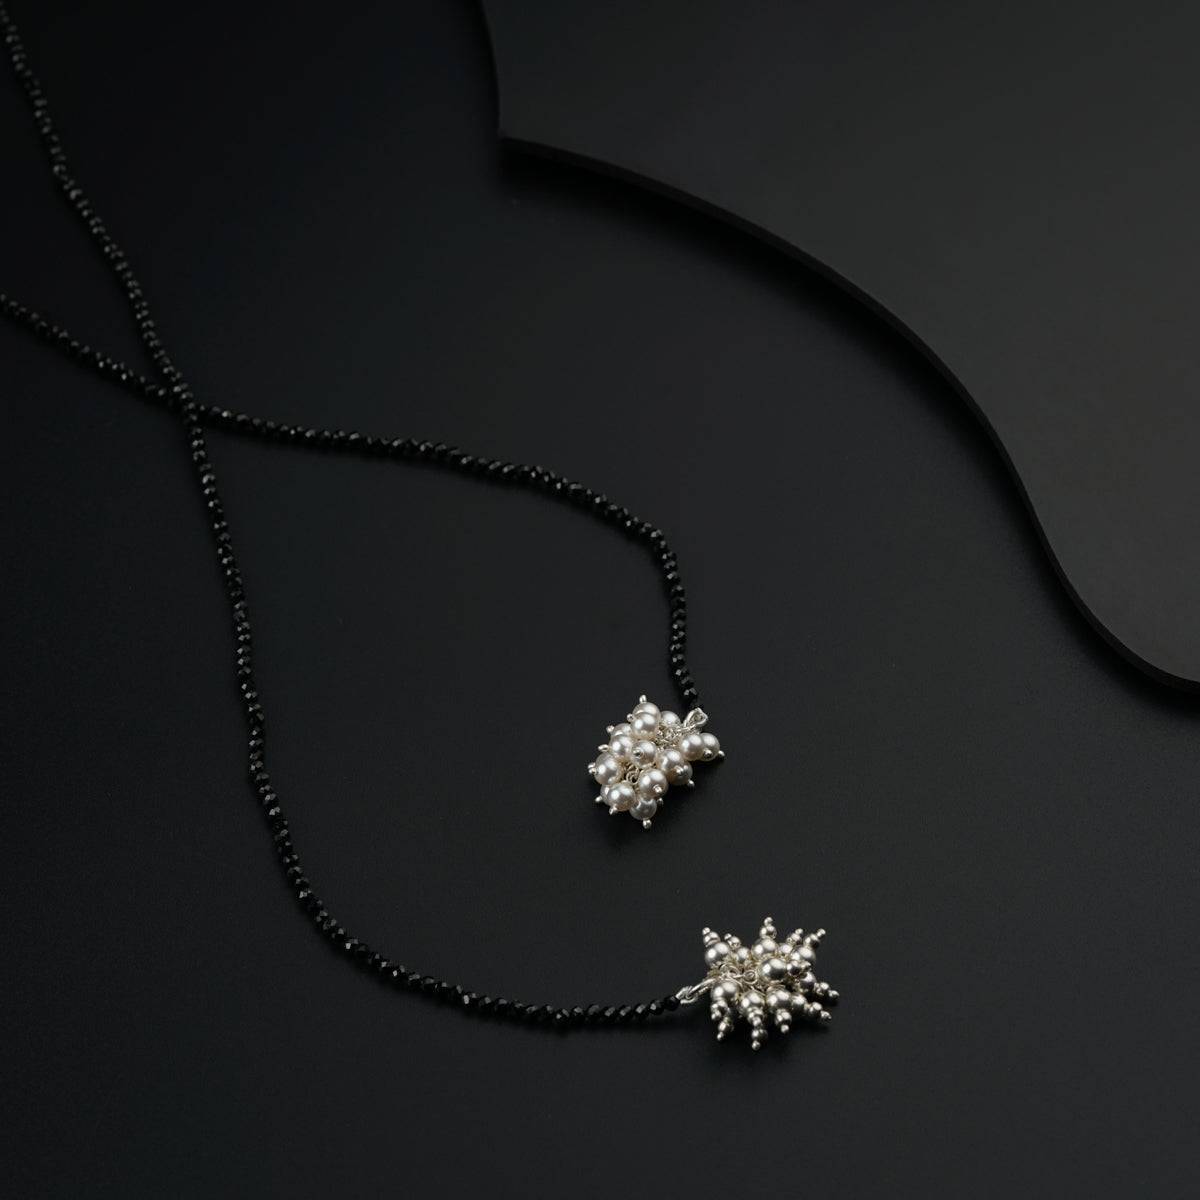 two necklaces with pearls on a black surface